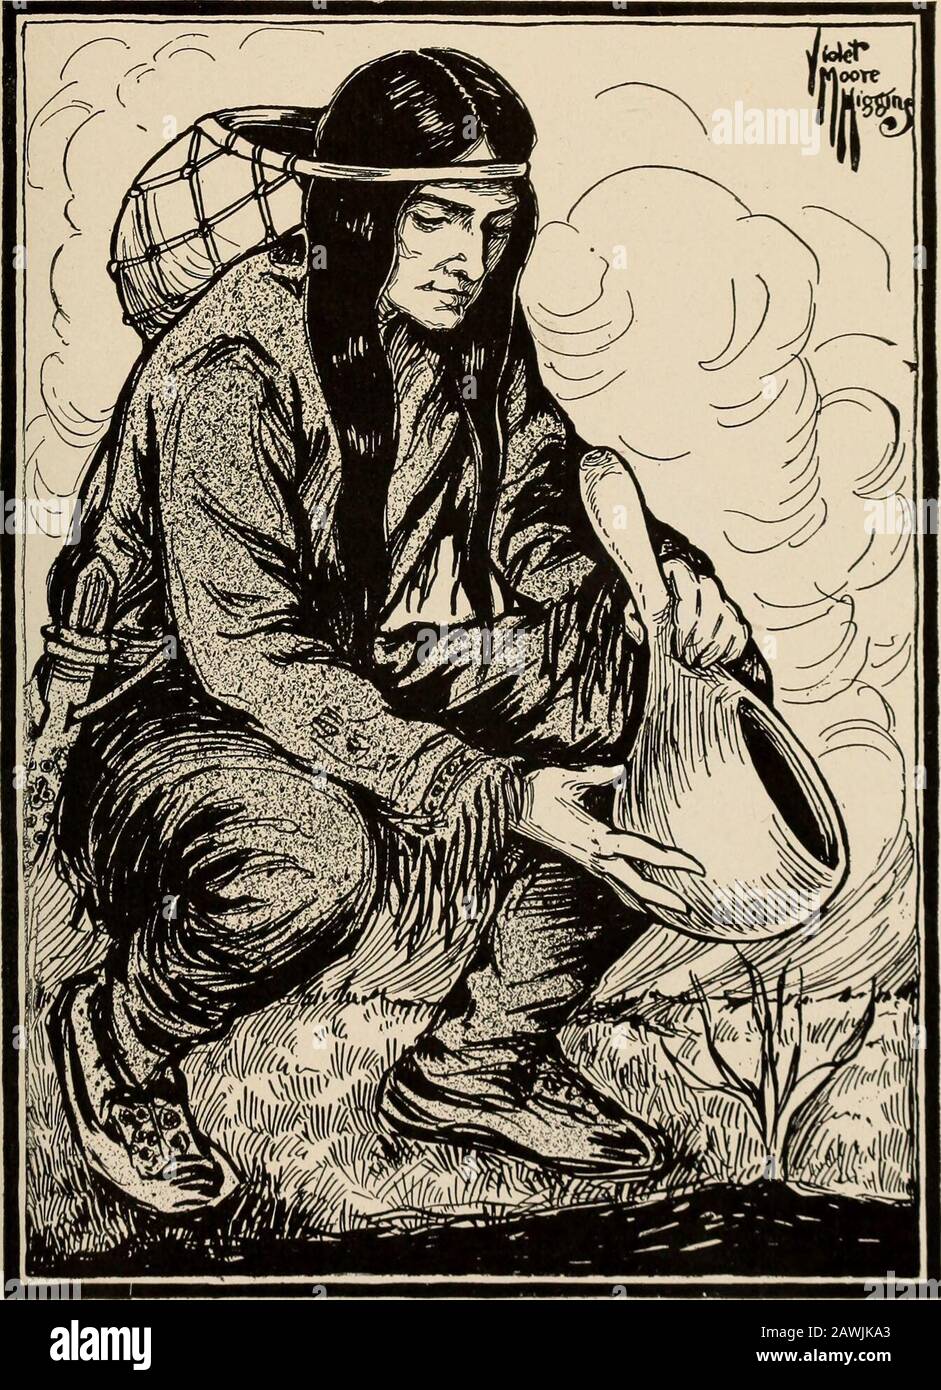 The lost giant and other American Indian tales retold; . tforth all his  strength and threw his foeto earth. The stranger murmured faint-ly: Your  promise—remember, and spokeno more. Gently, tenderly, with tears